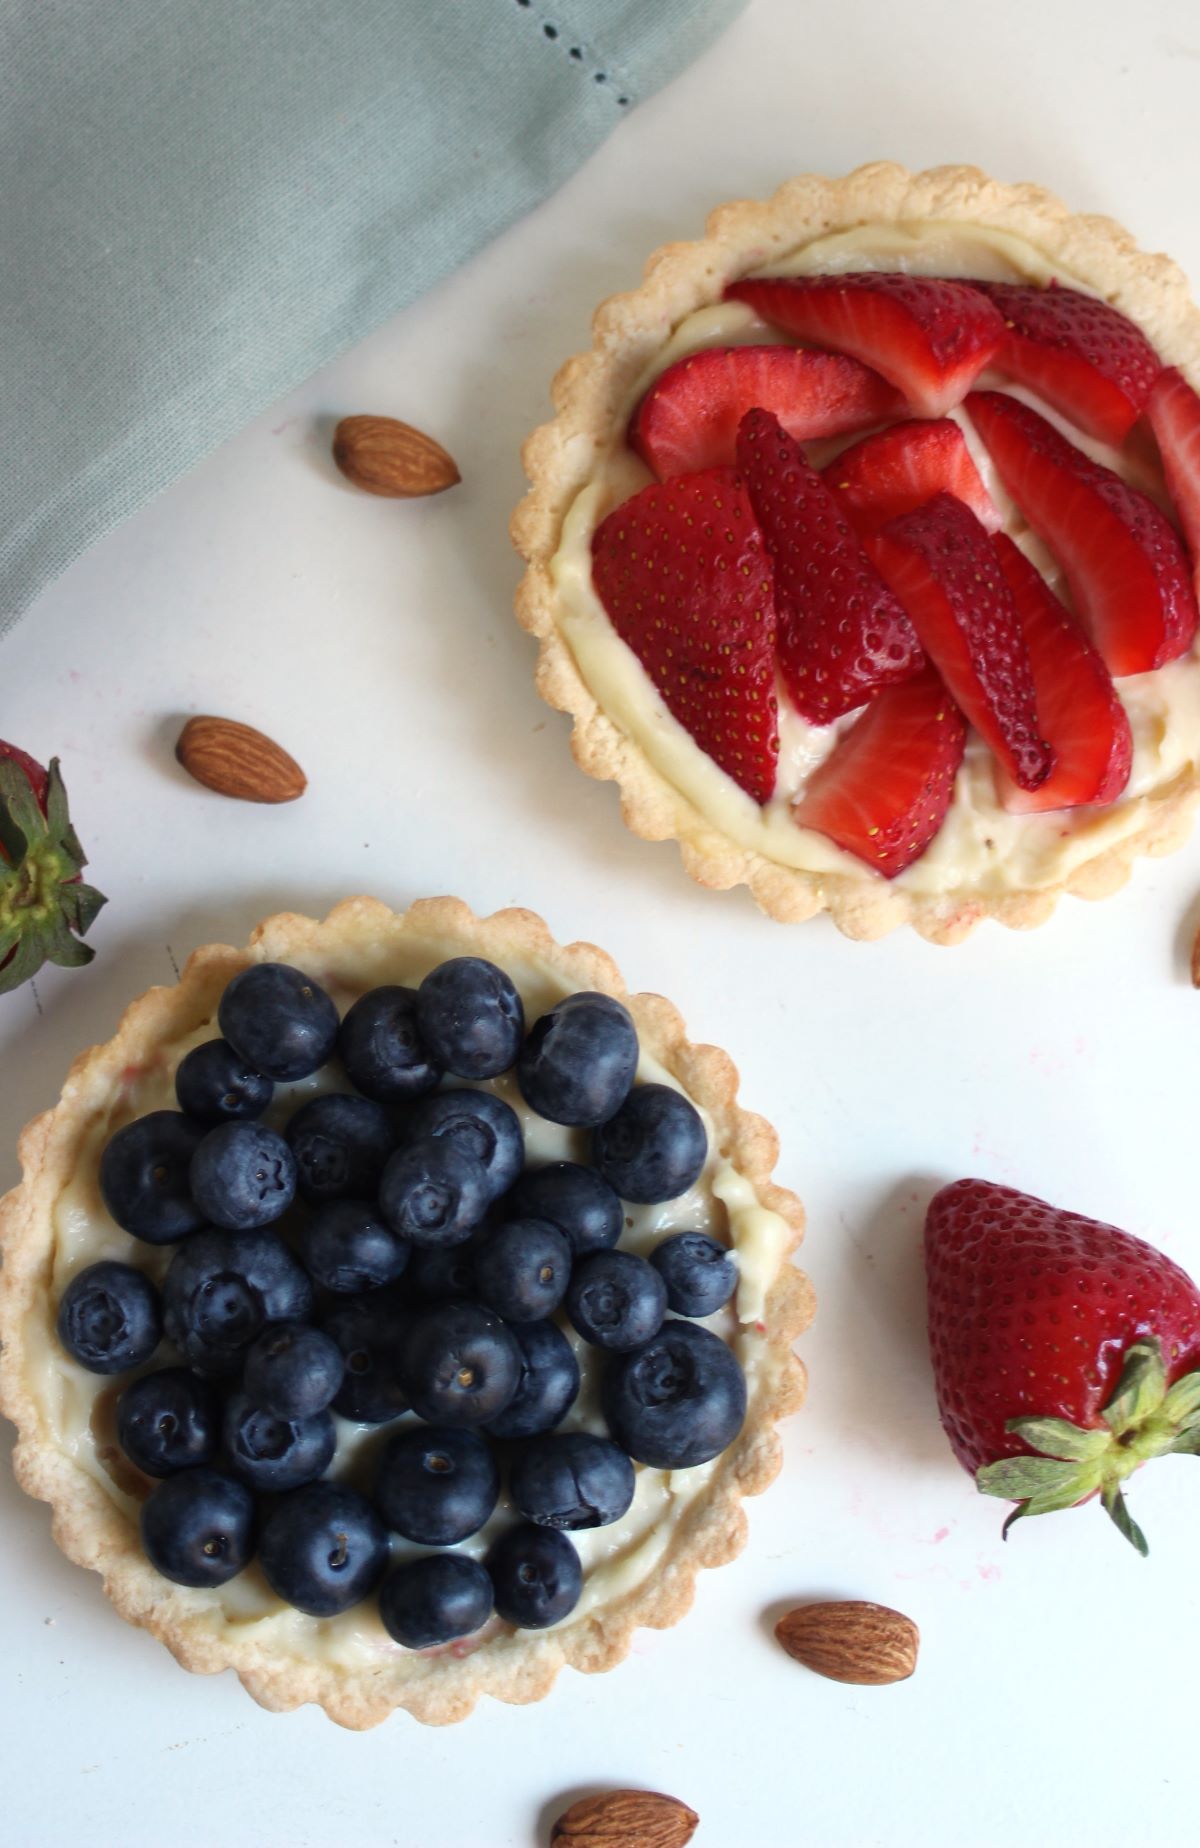 A strawberry and a blueberry tart seen from above. Fresh strawberries and almond on the sides.